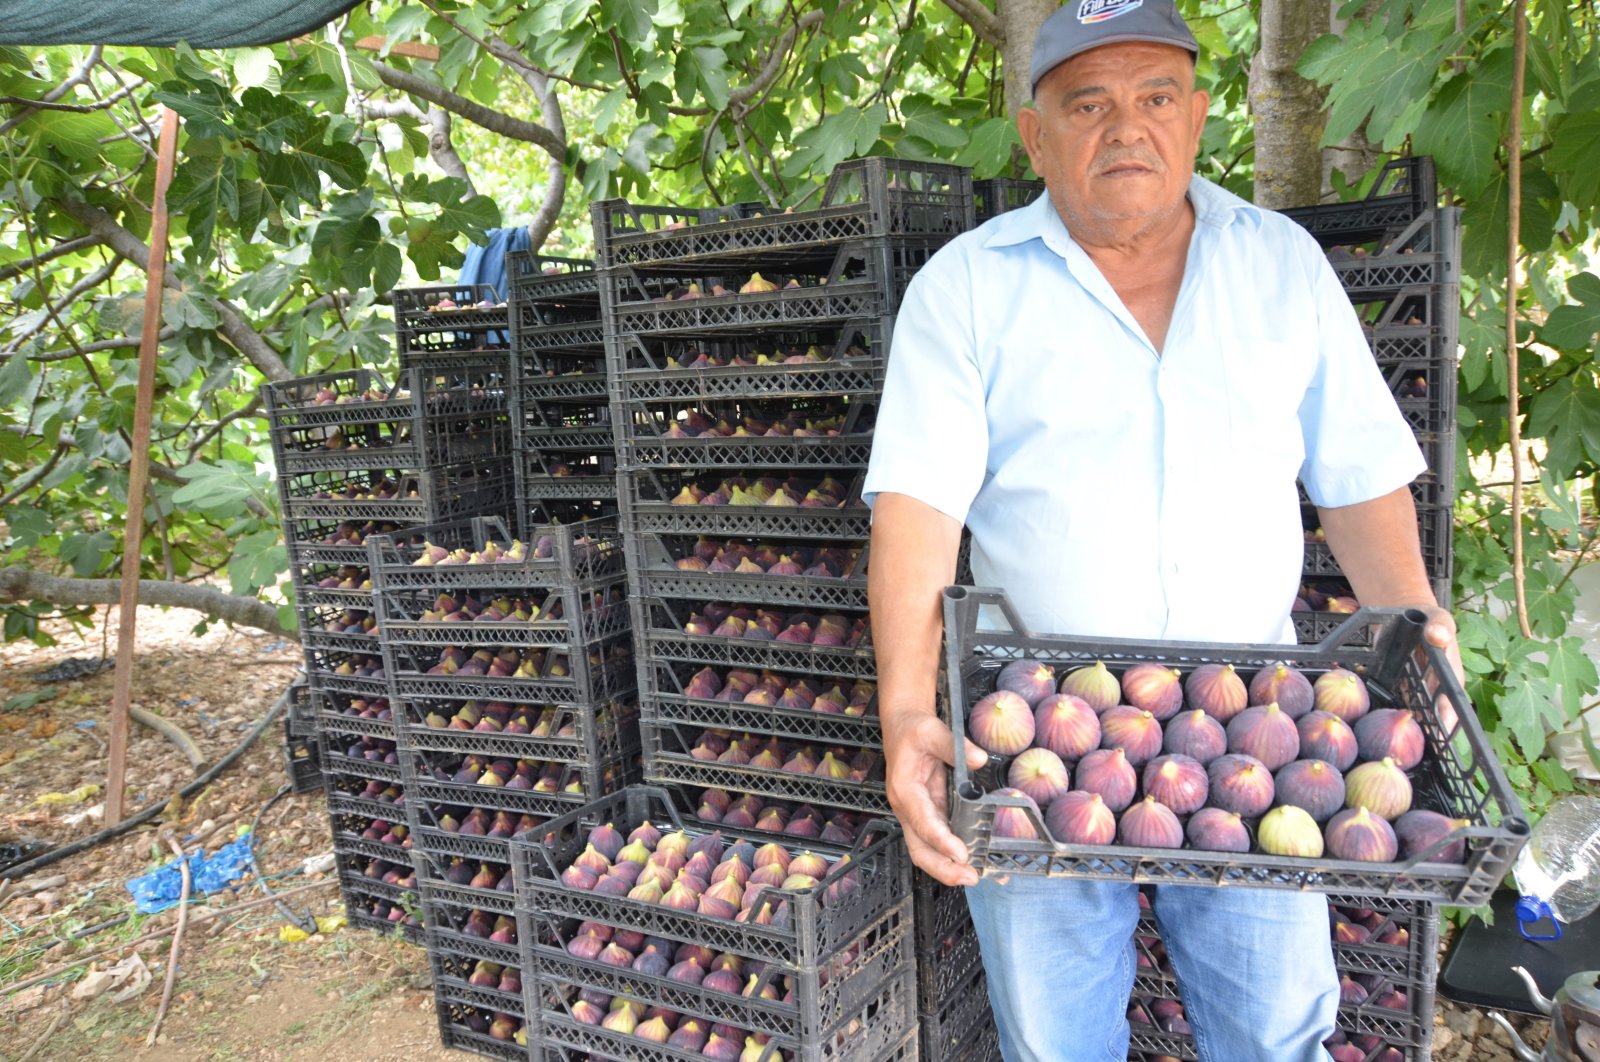 Producers face less fig yields amid rising temperatures in S. Türkiye